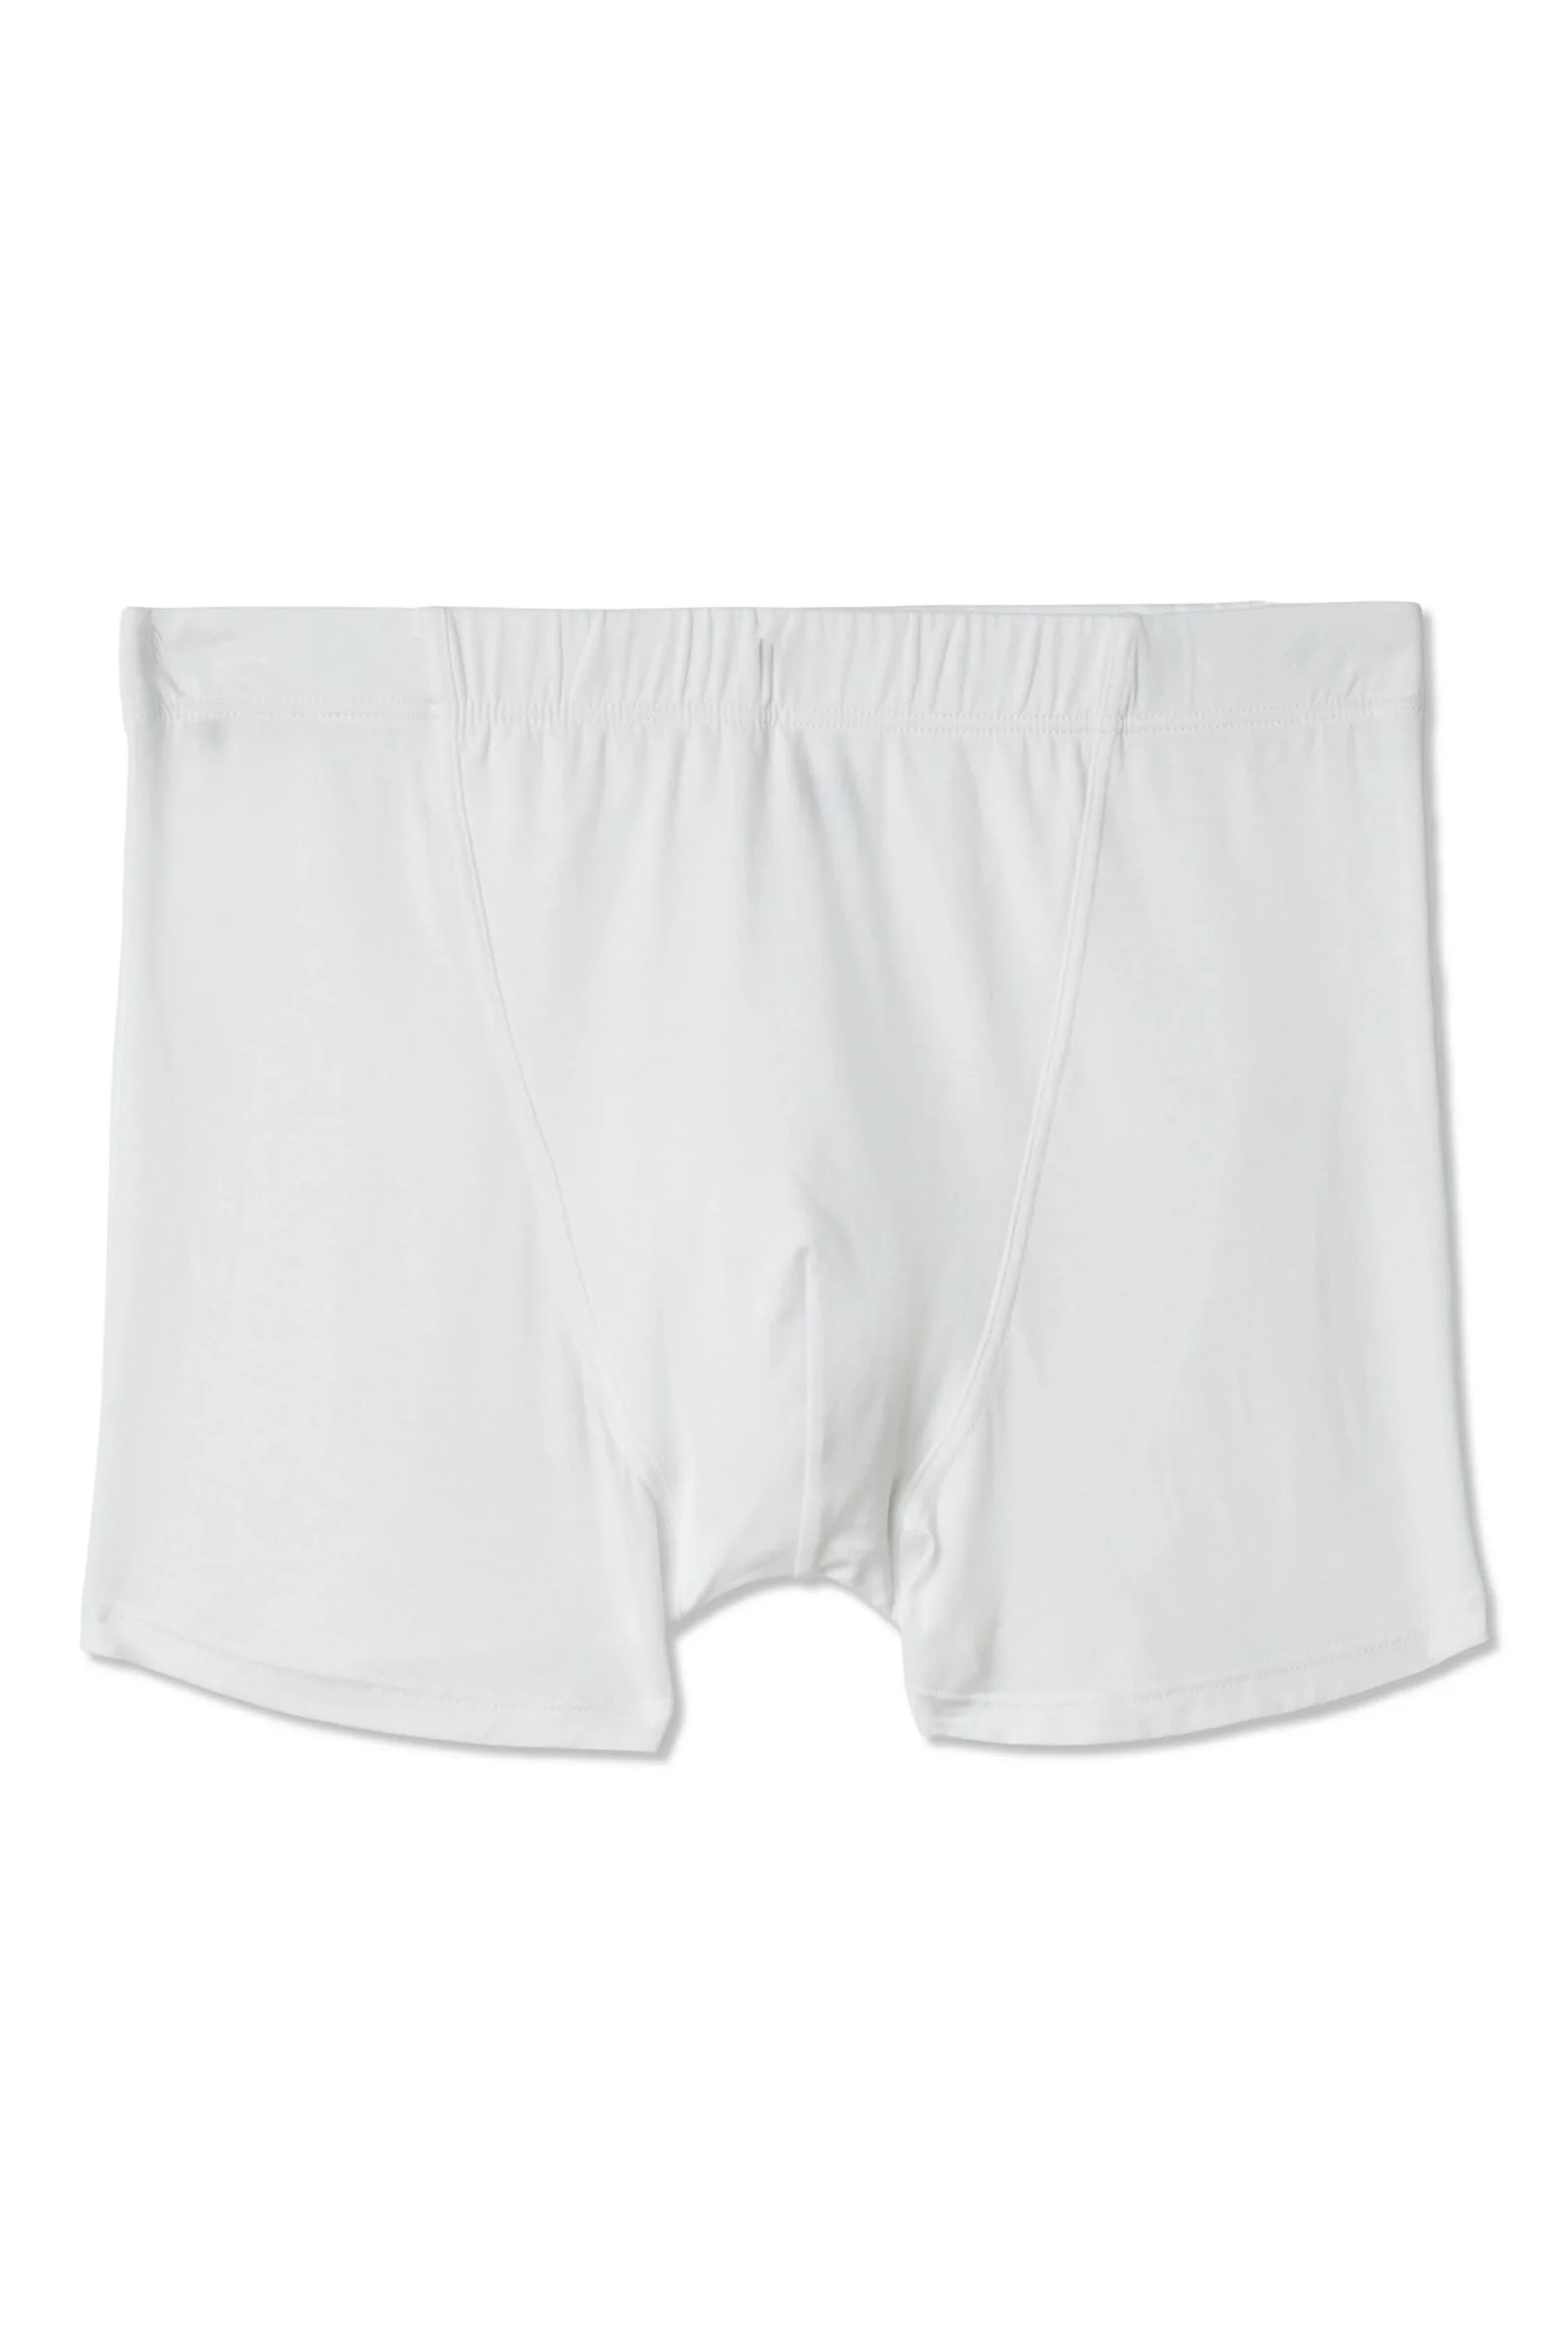 Image of SwissTouch Cotton Boxer Brief